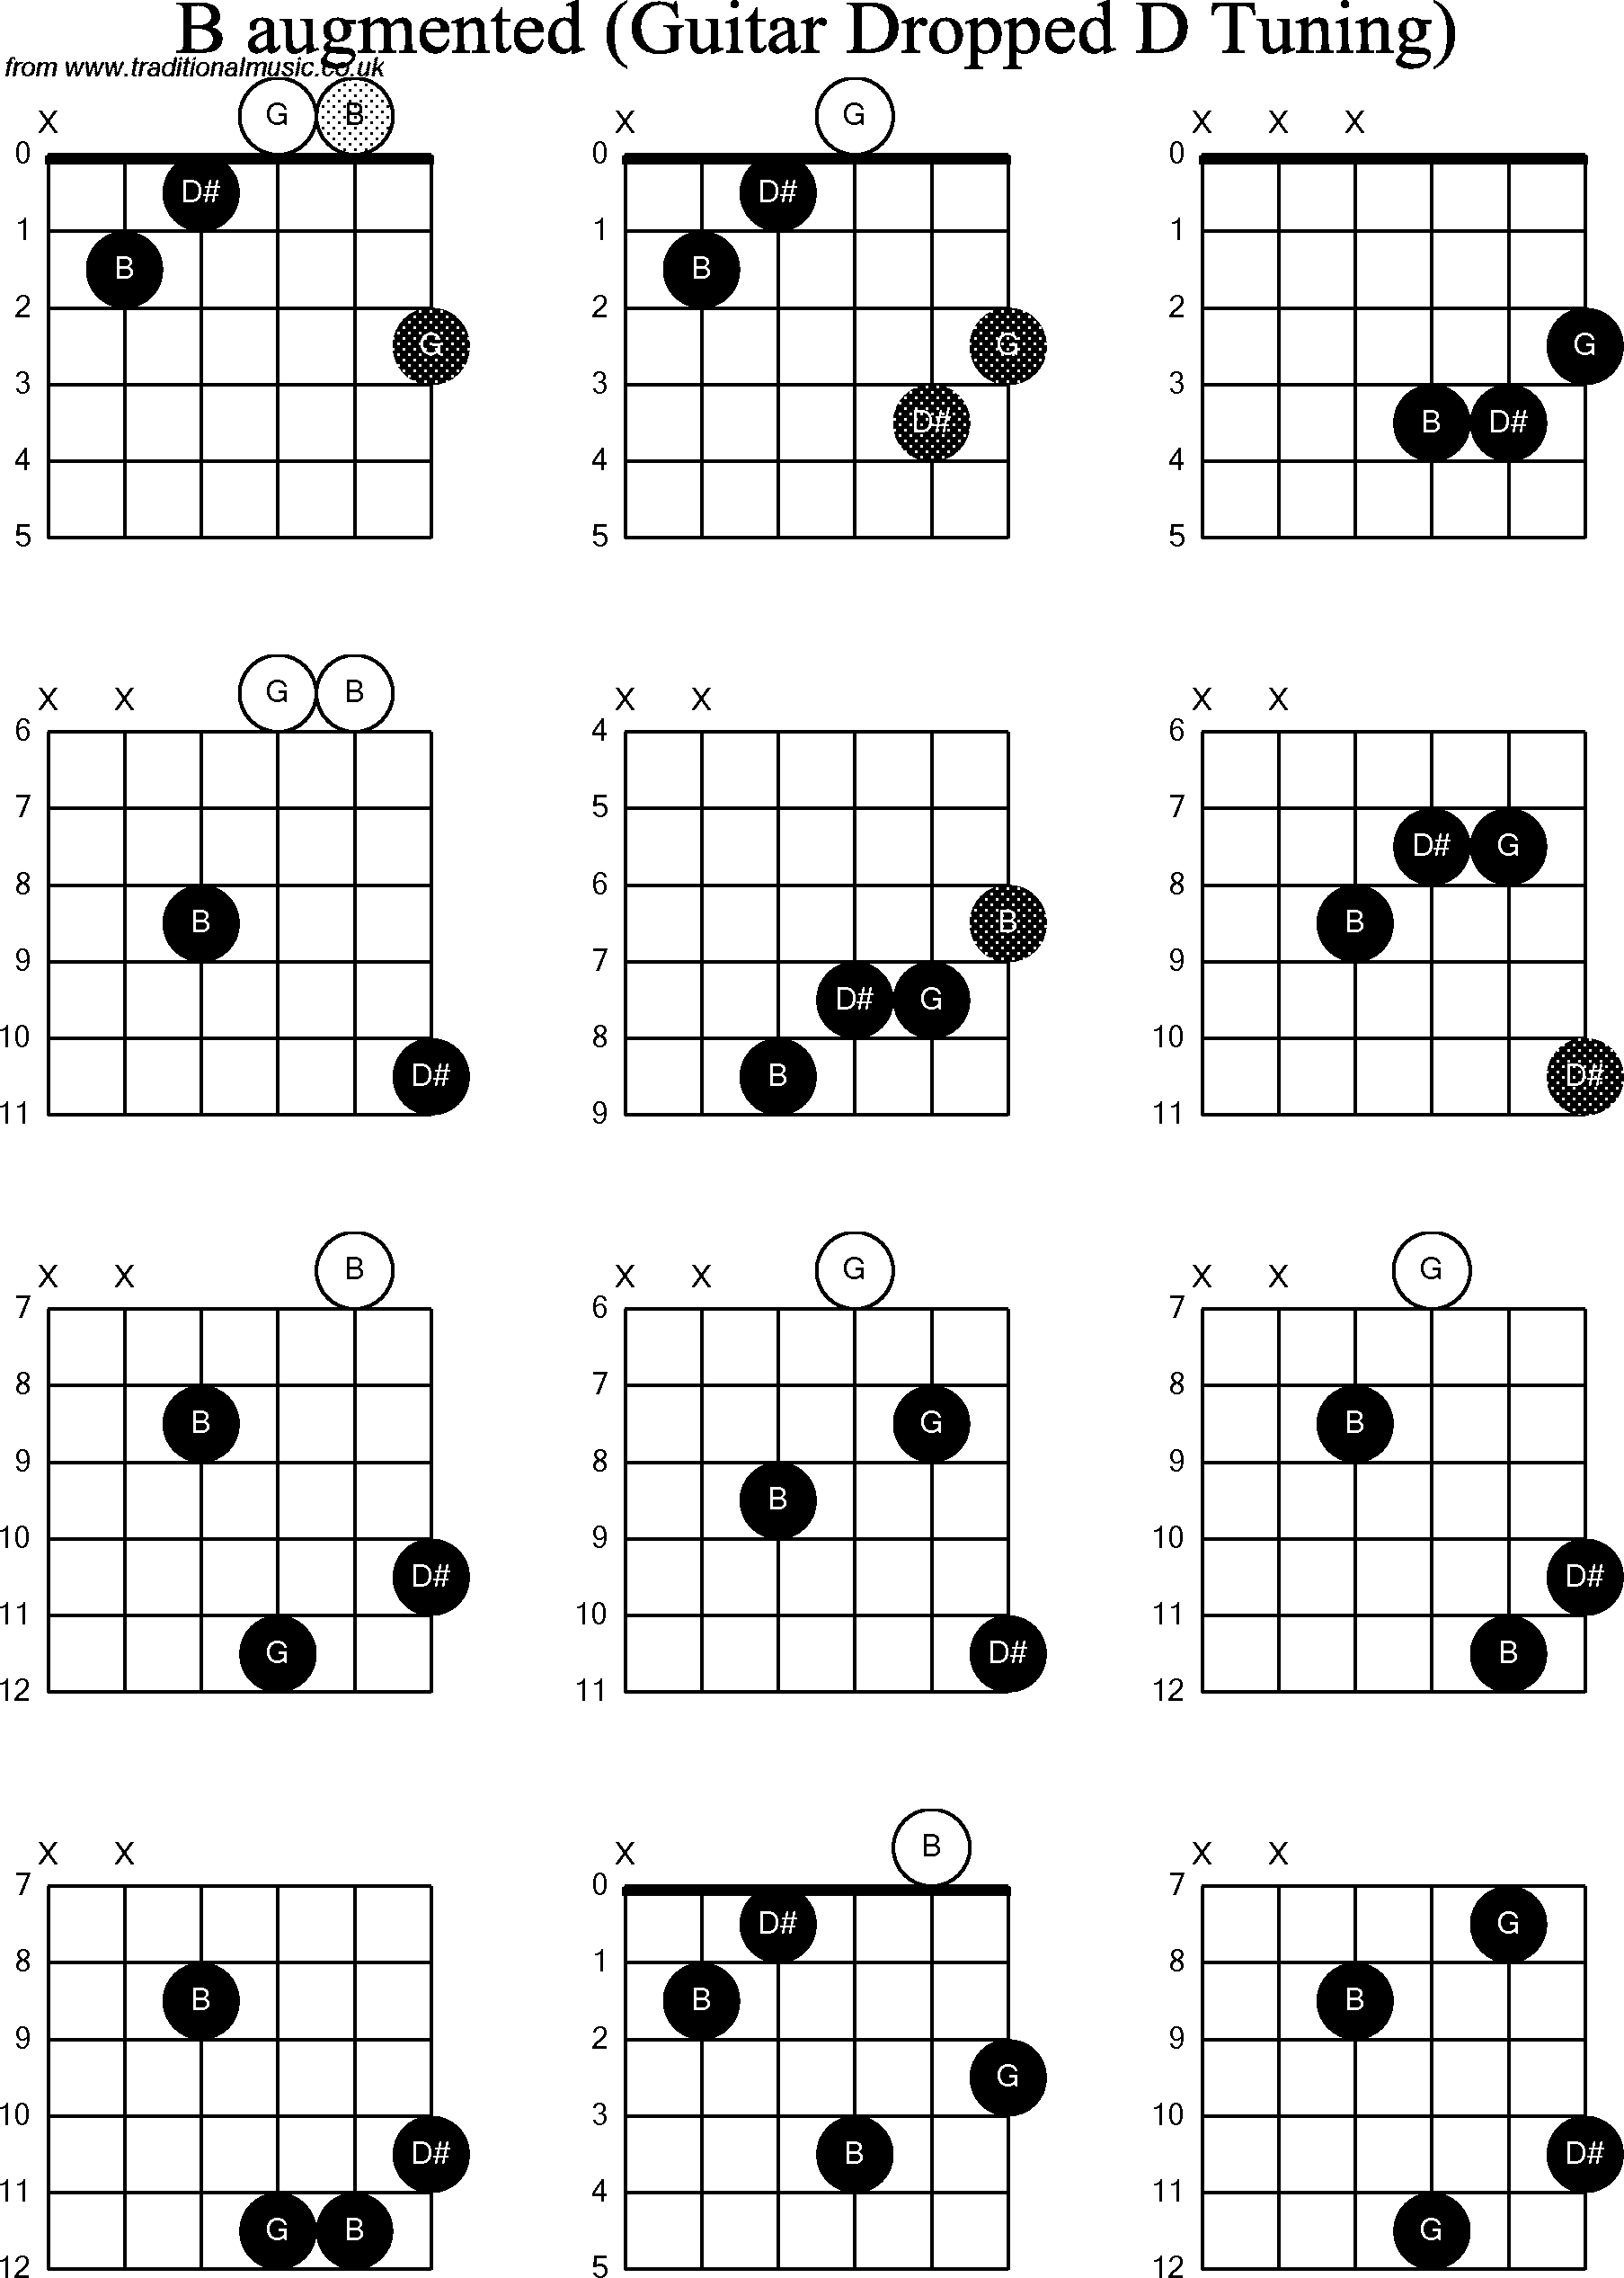 Chord diagrams for dropped D Guitar(DADGBE), B Augmented